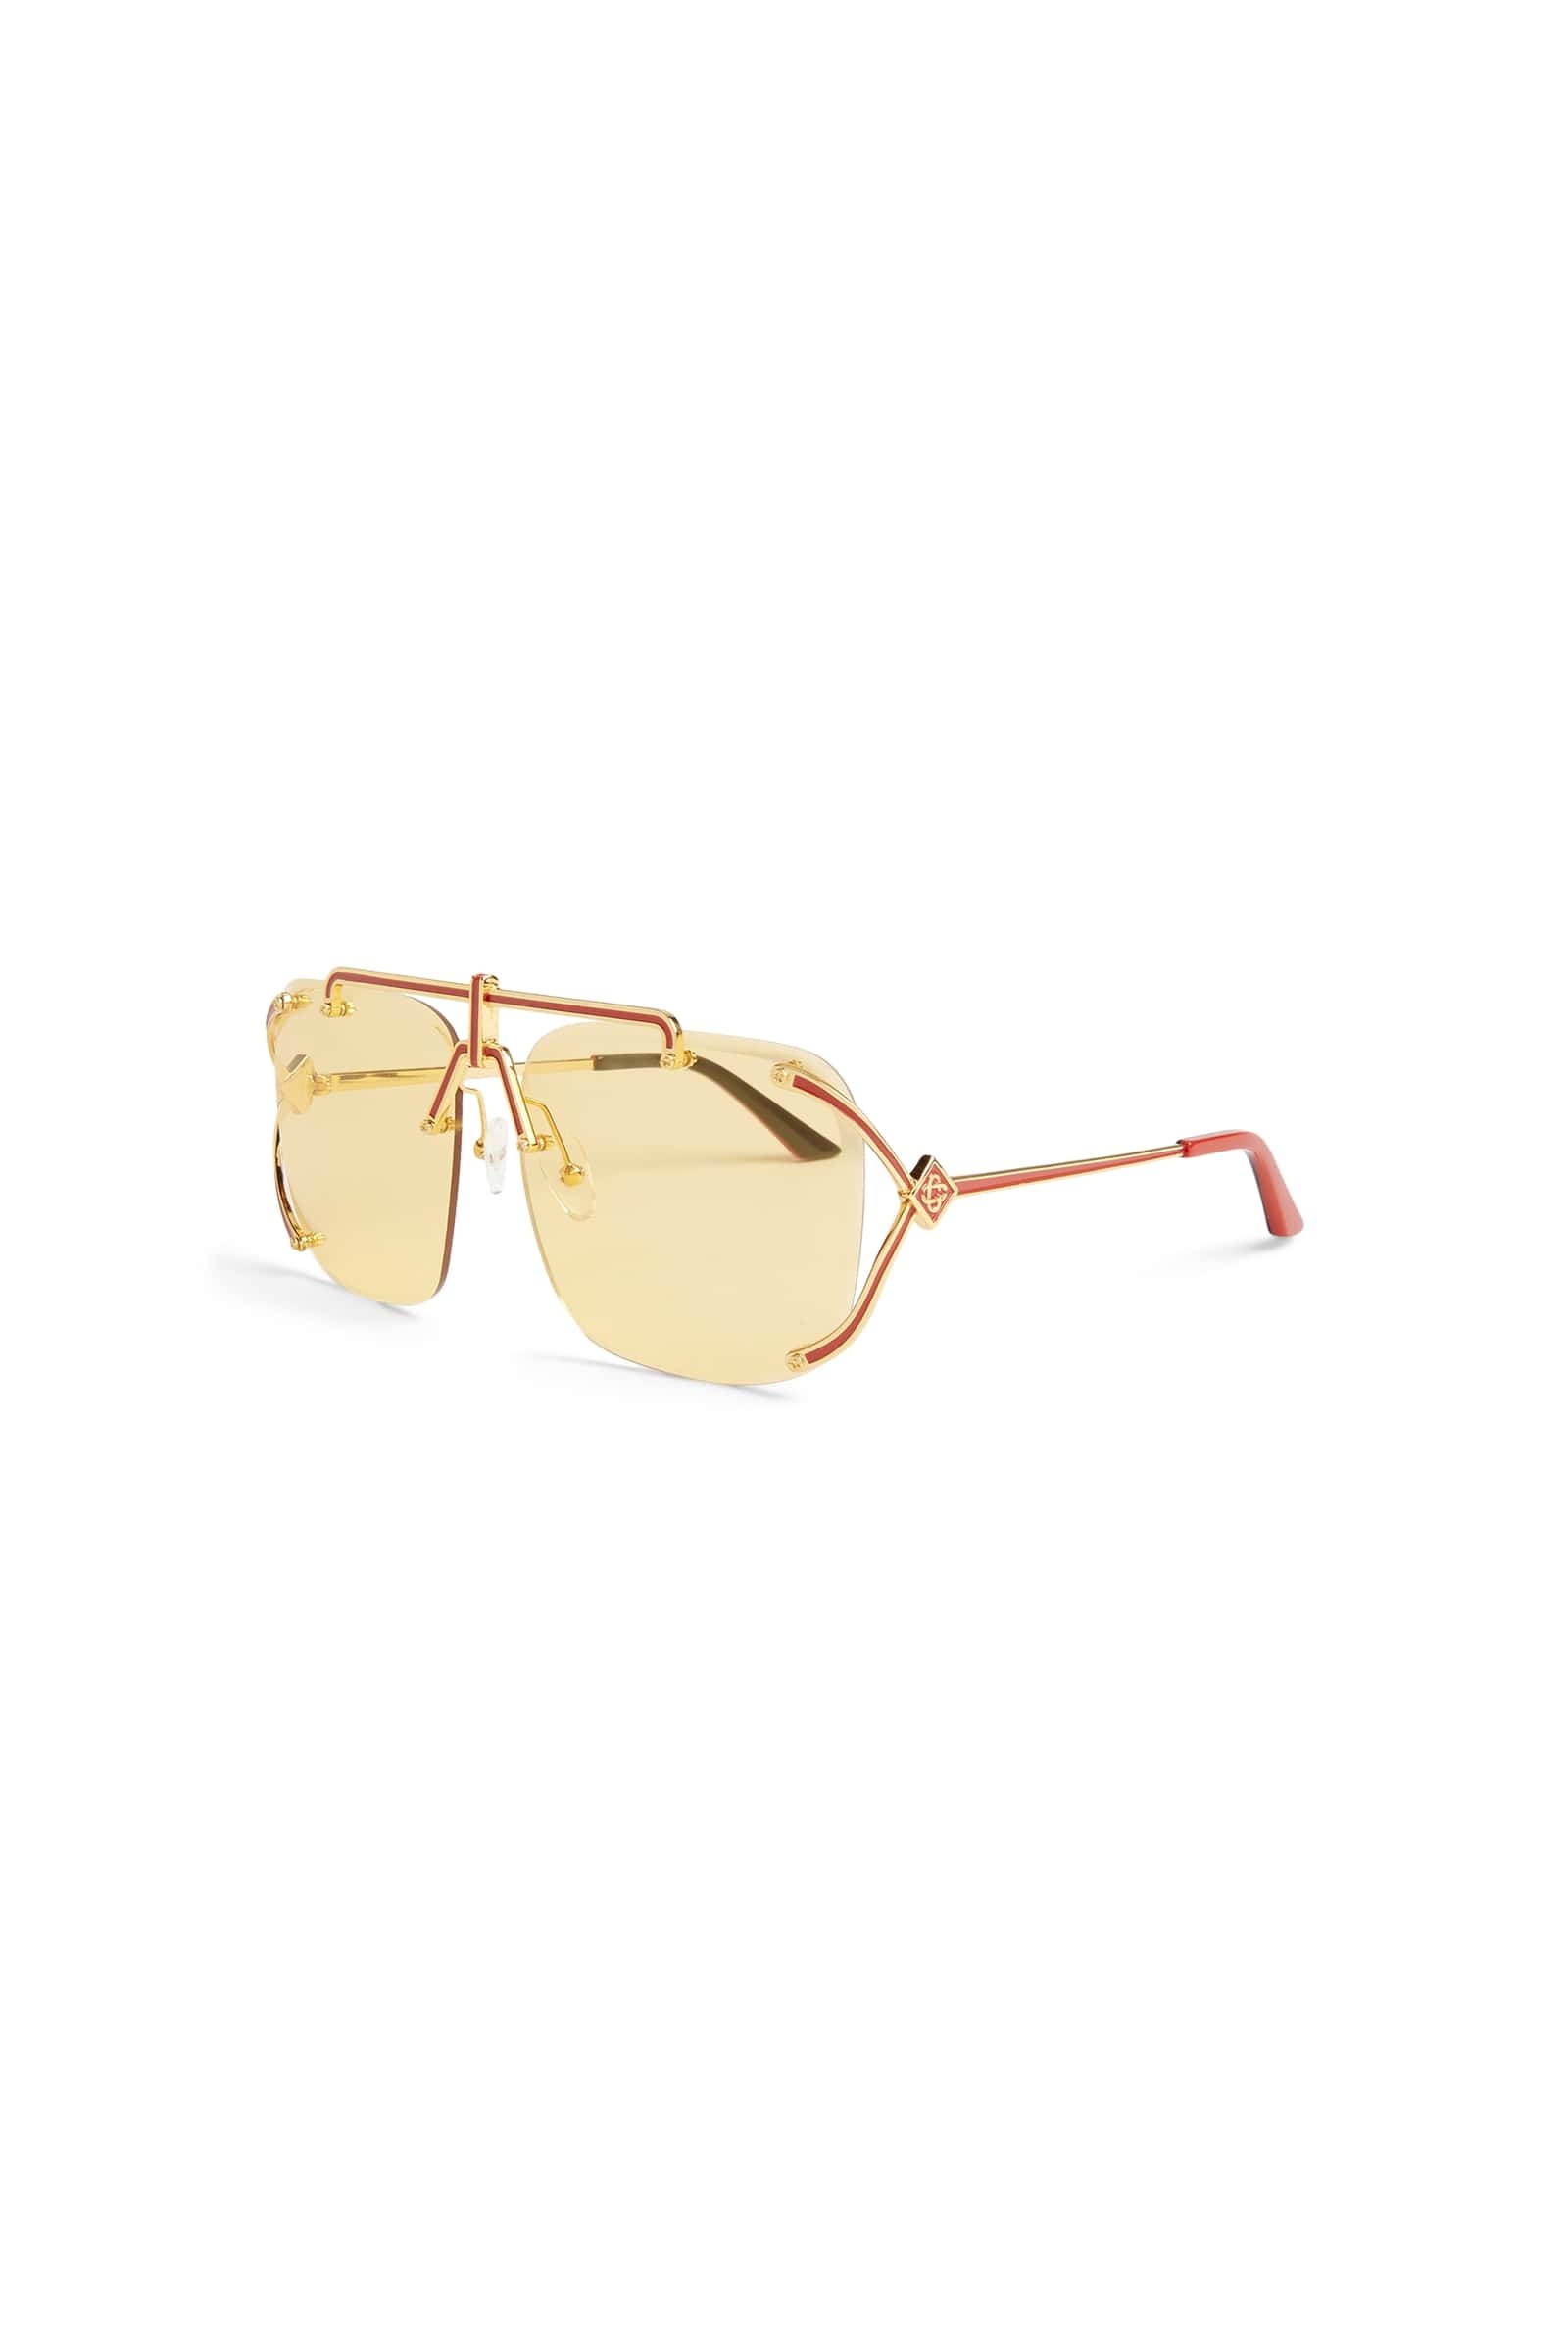 Gold & Red The Pilot Sunglasses - 1